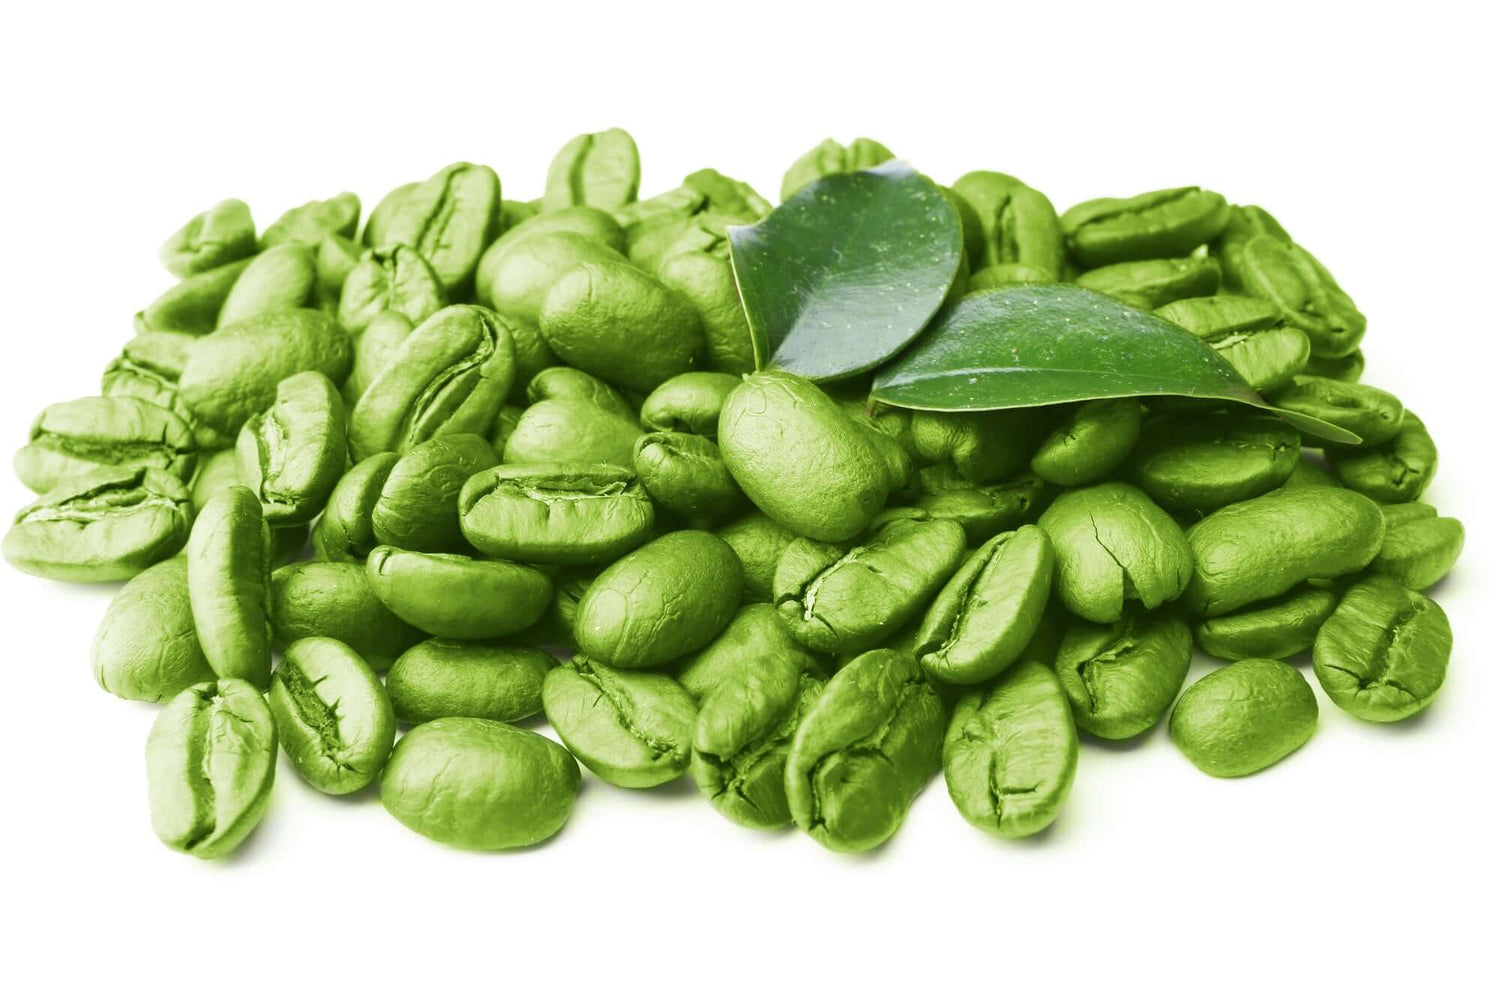 Surprising Benefits of Green Coffee beans you should not miss!